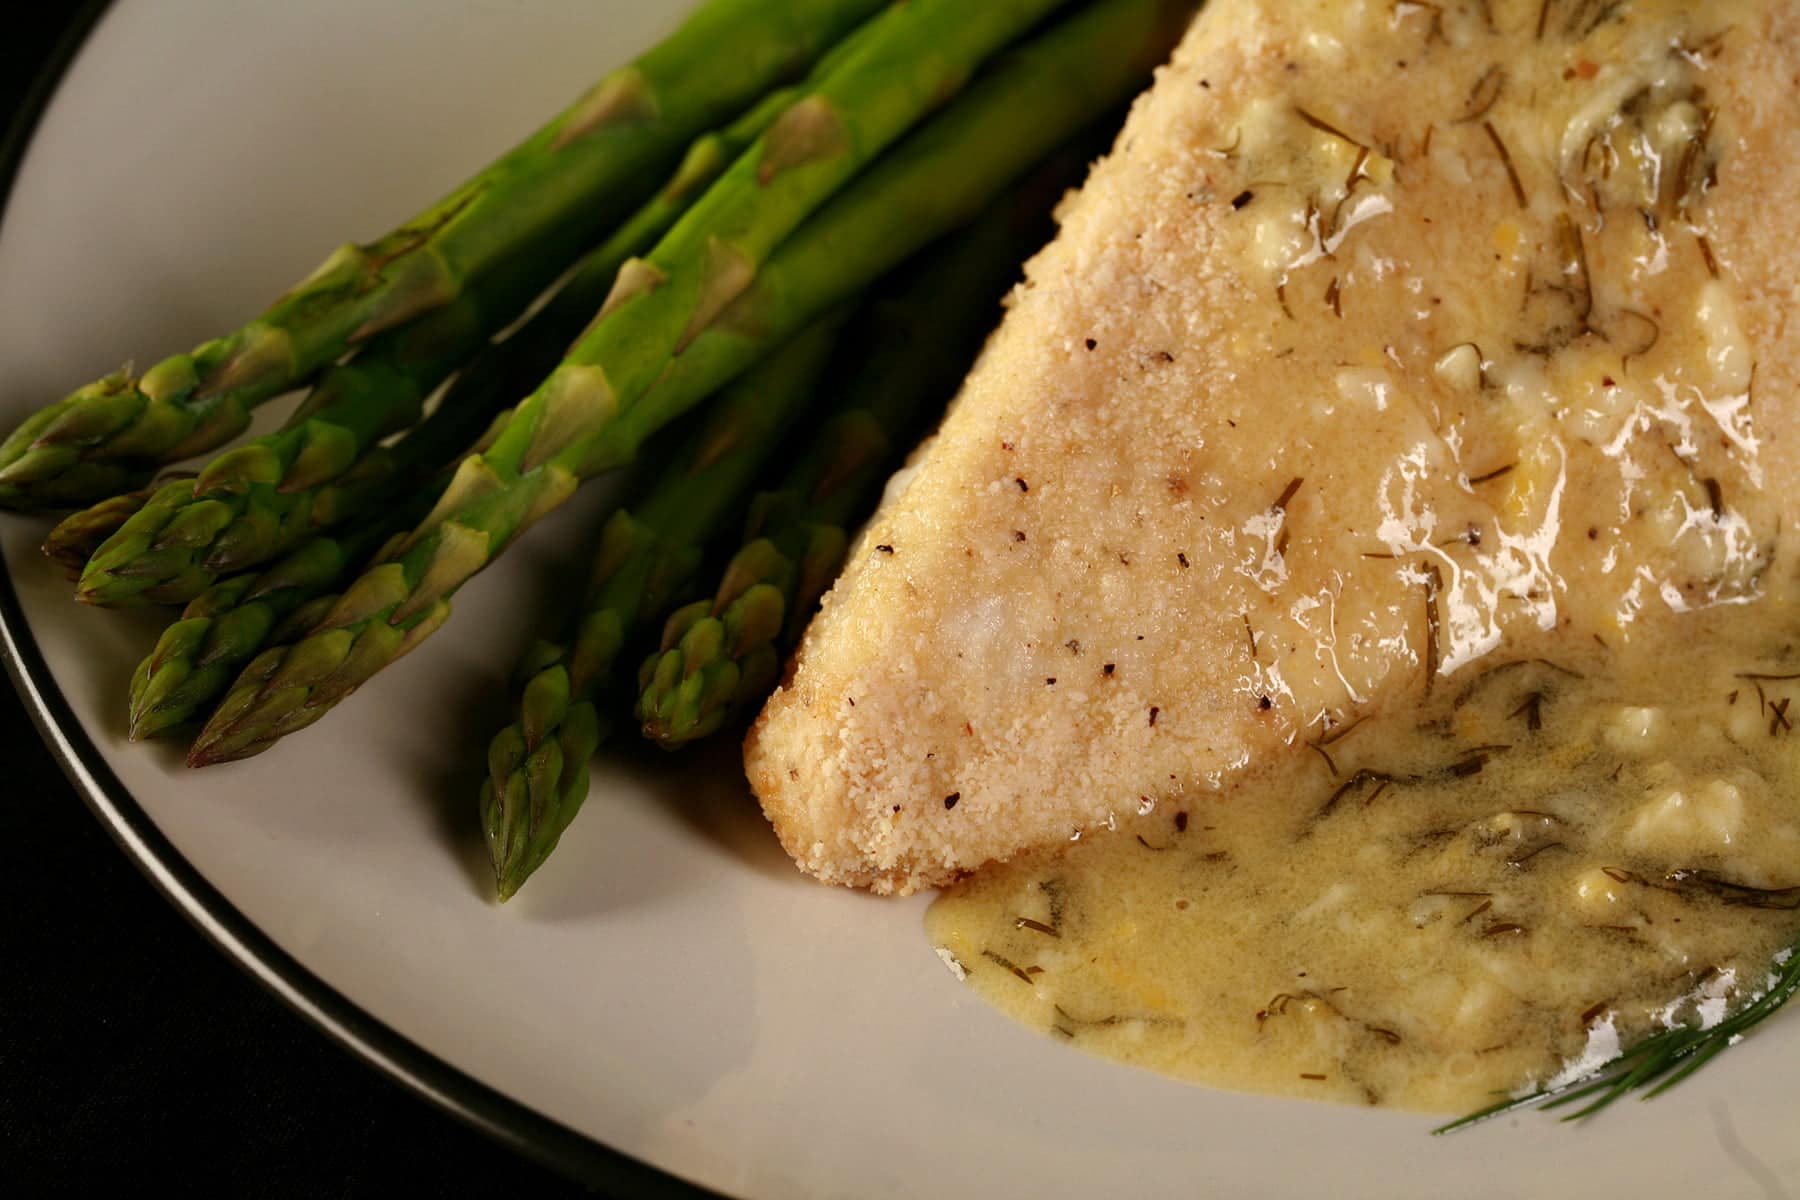 A large piece of almond crusted halibut is on a white plate. A yellow cream sauce with flecks of green - lemon dill cream sauce - has been poured over the fish, and there are asparagus spears on the side.